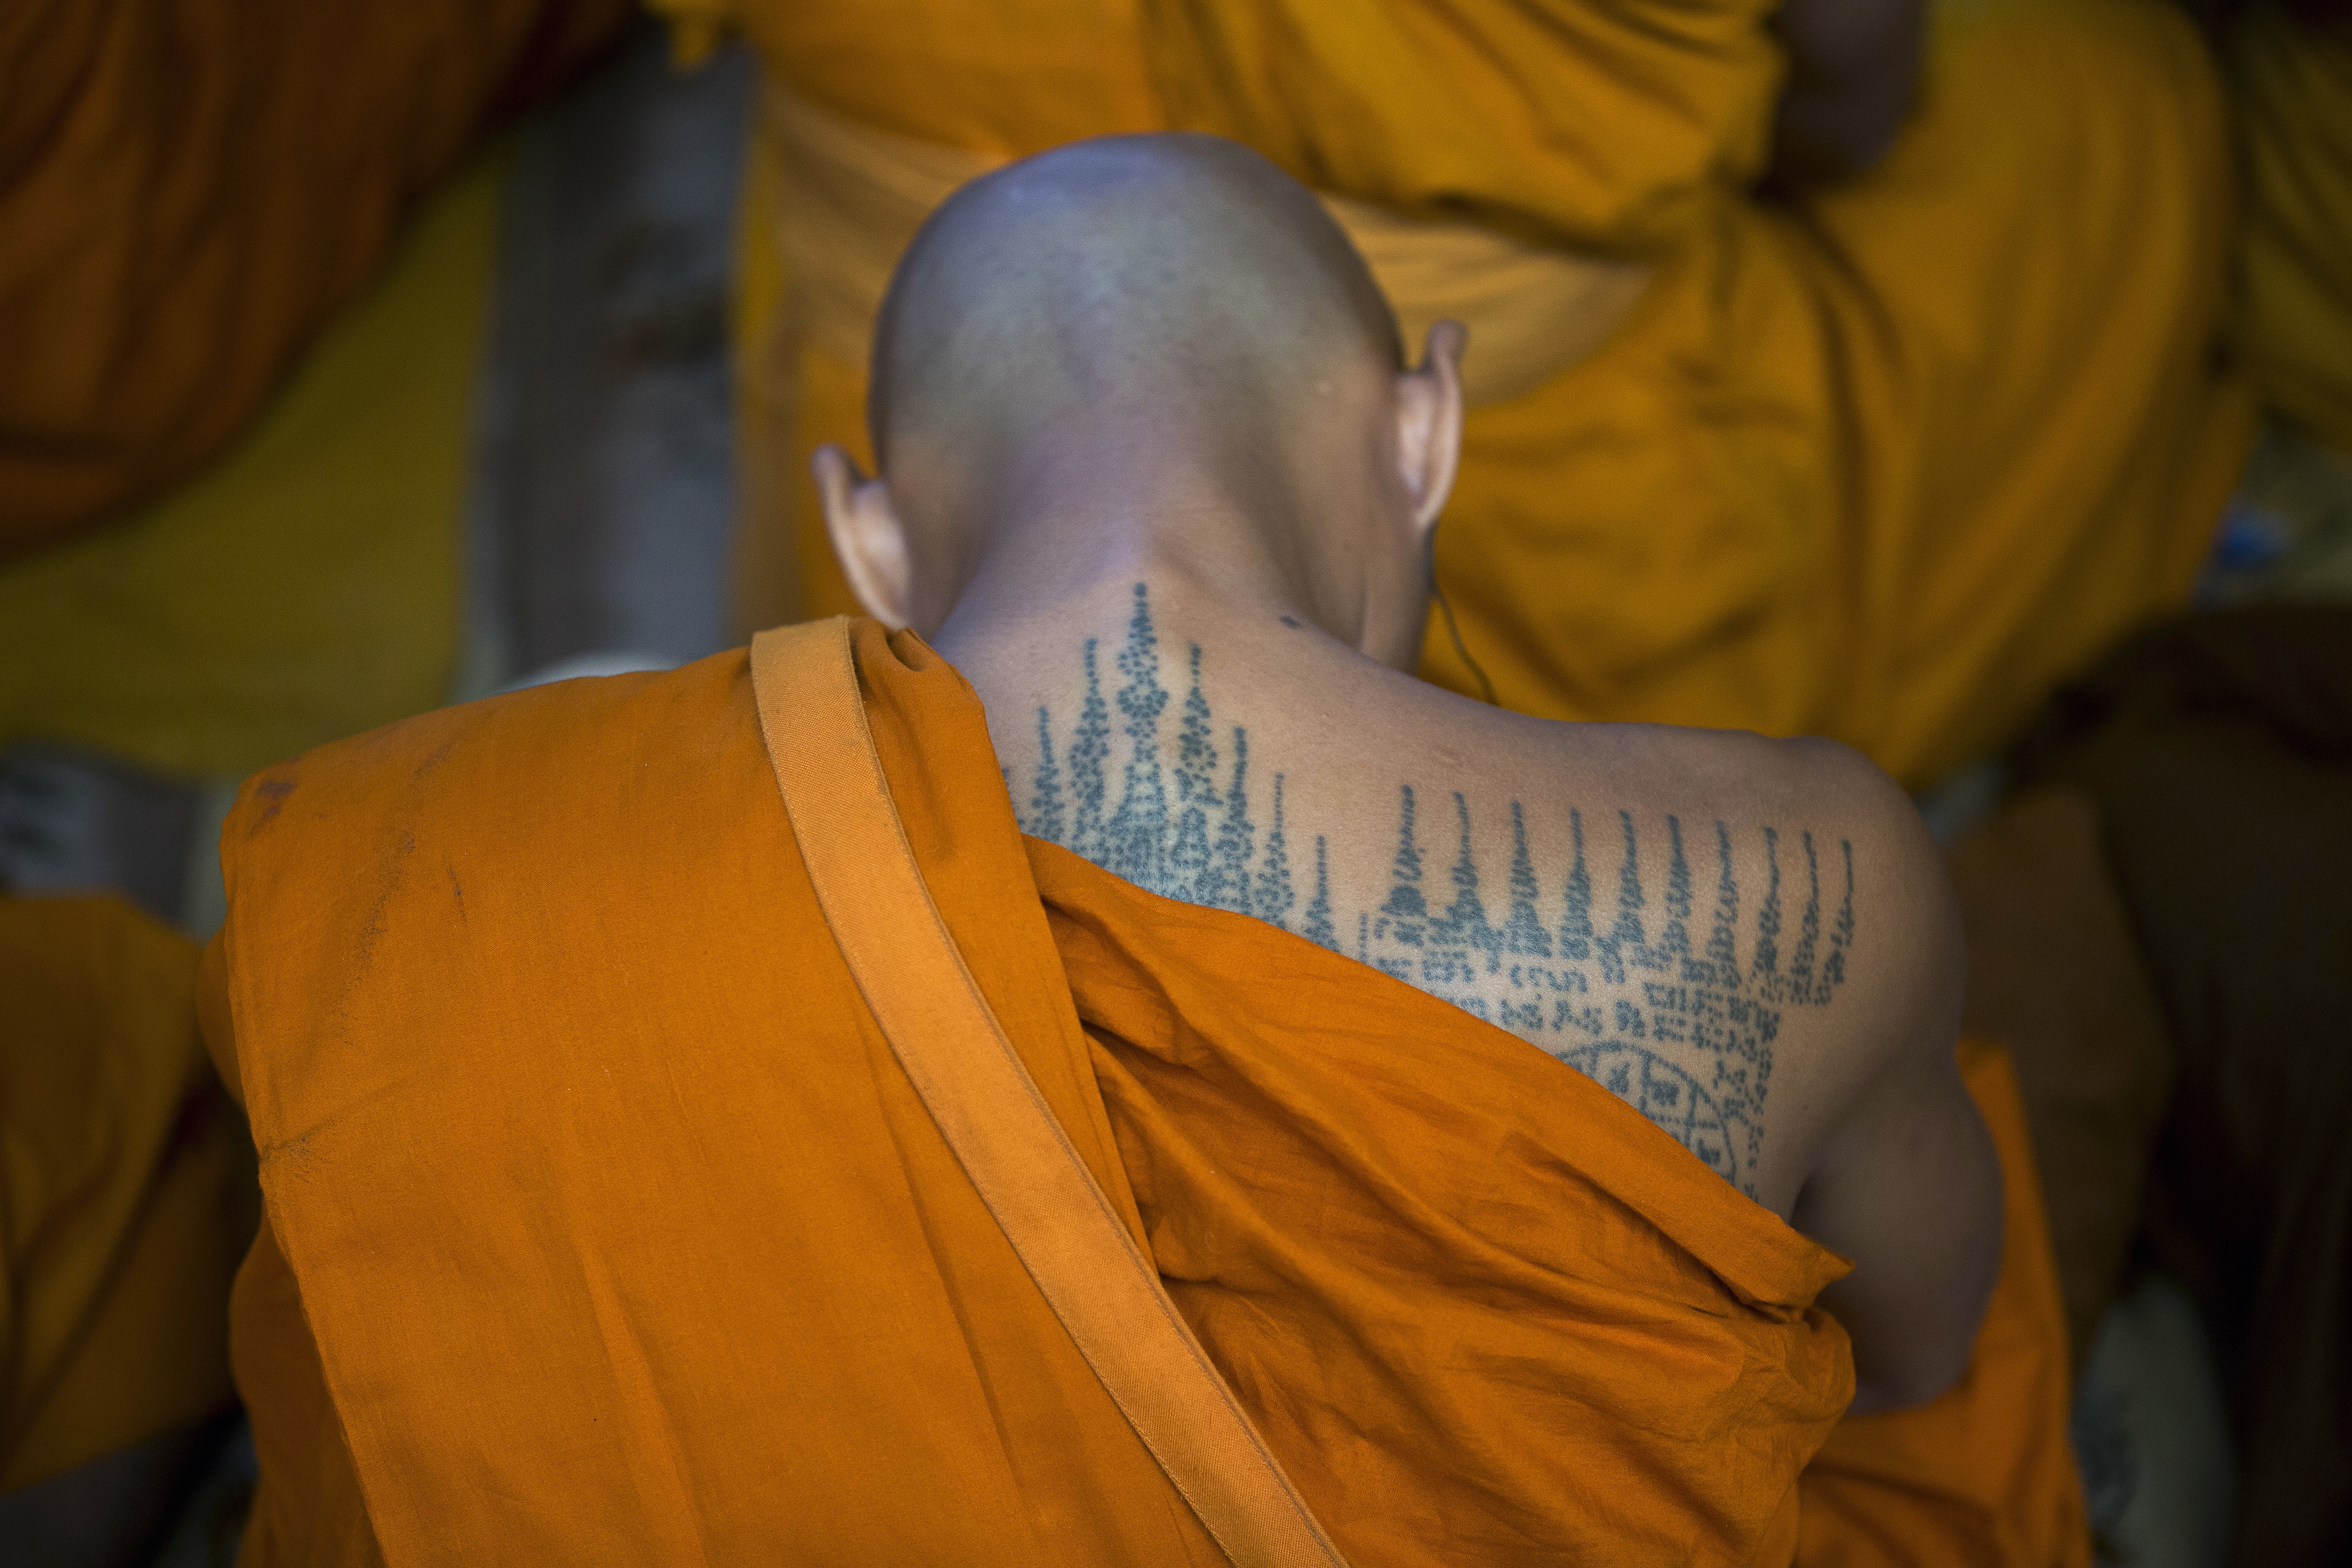 A Thai Buddhist monk with a tattooed back prays as he listens to the Tibetan spiritual leader Dalai Lama during a religious talk at the Tsuglagkhang temple in Dharmsala, India, Wednesday, June 7, 2017. Each year the Tibetan leader talks to young Tibetans on Buddhist philosophy and selected texts. The three-day talk ended Wednesday. (AP Photo/Ashwini Bhatia)